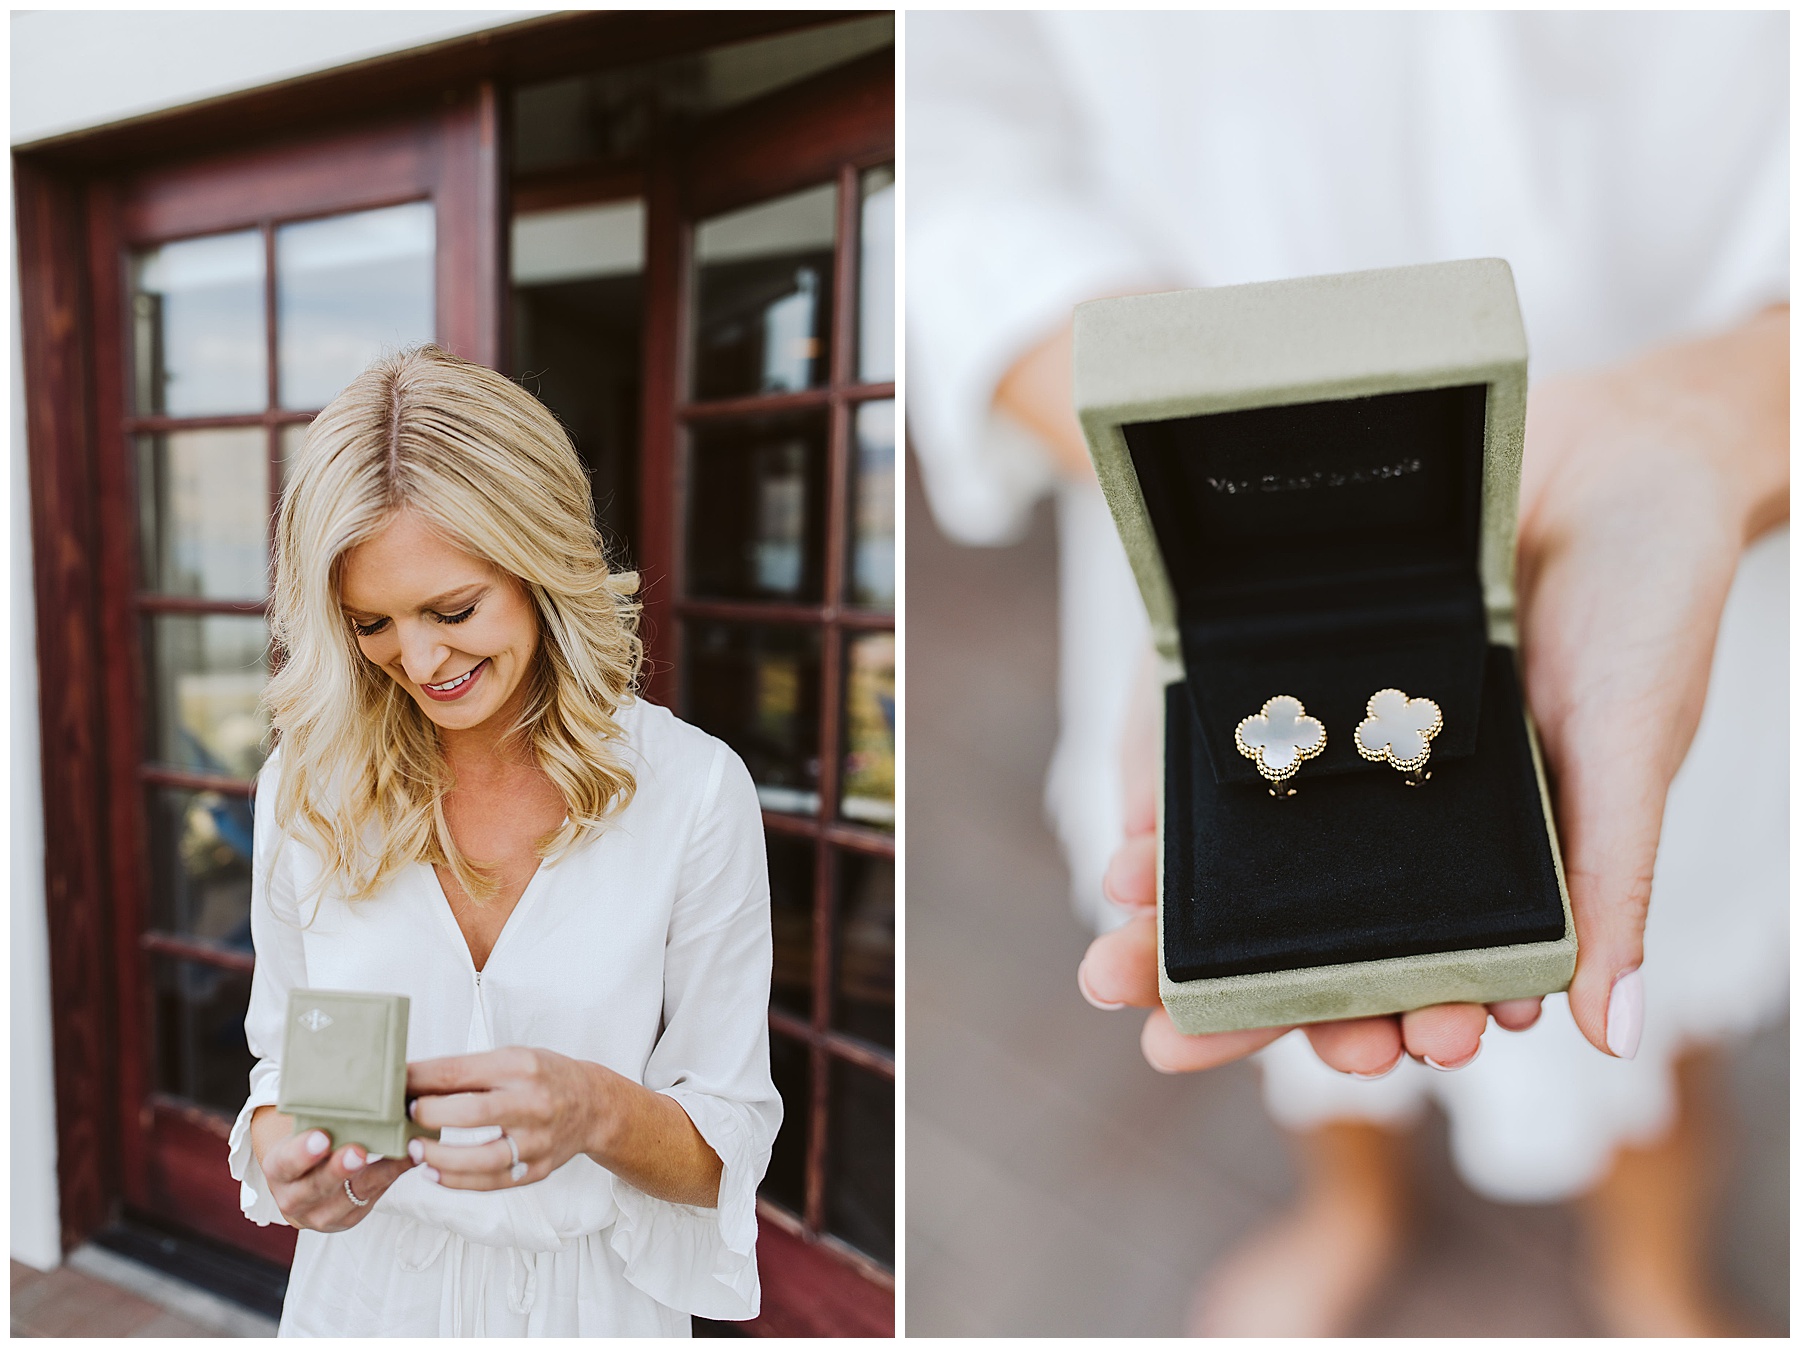 Jamie holding the earrings her fiance gifted to her on their wedding day at Karma Vineyards